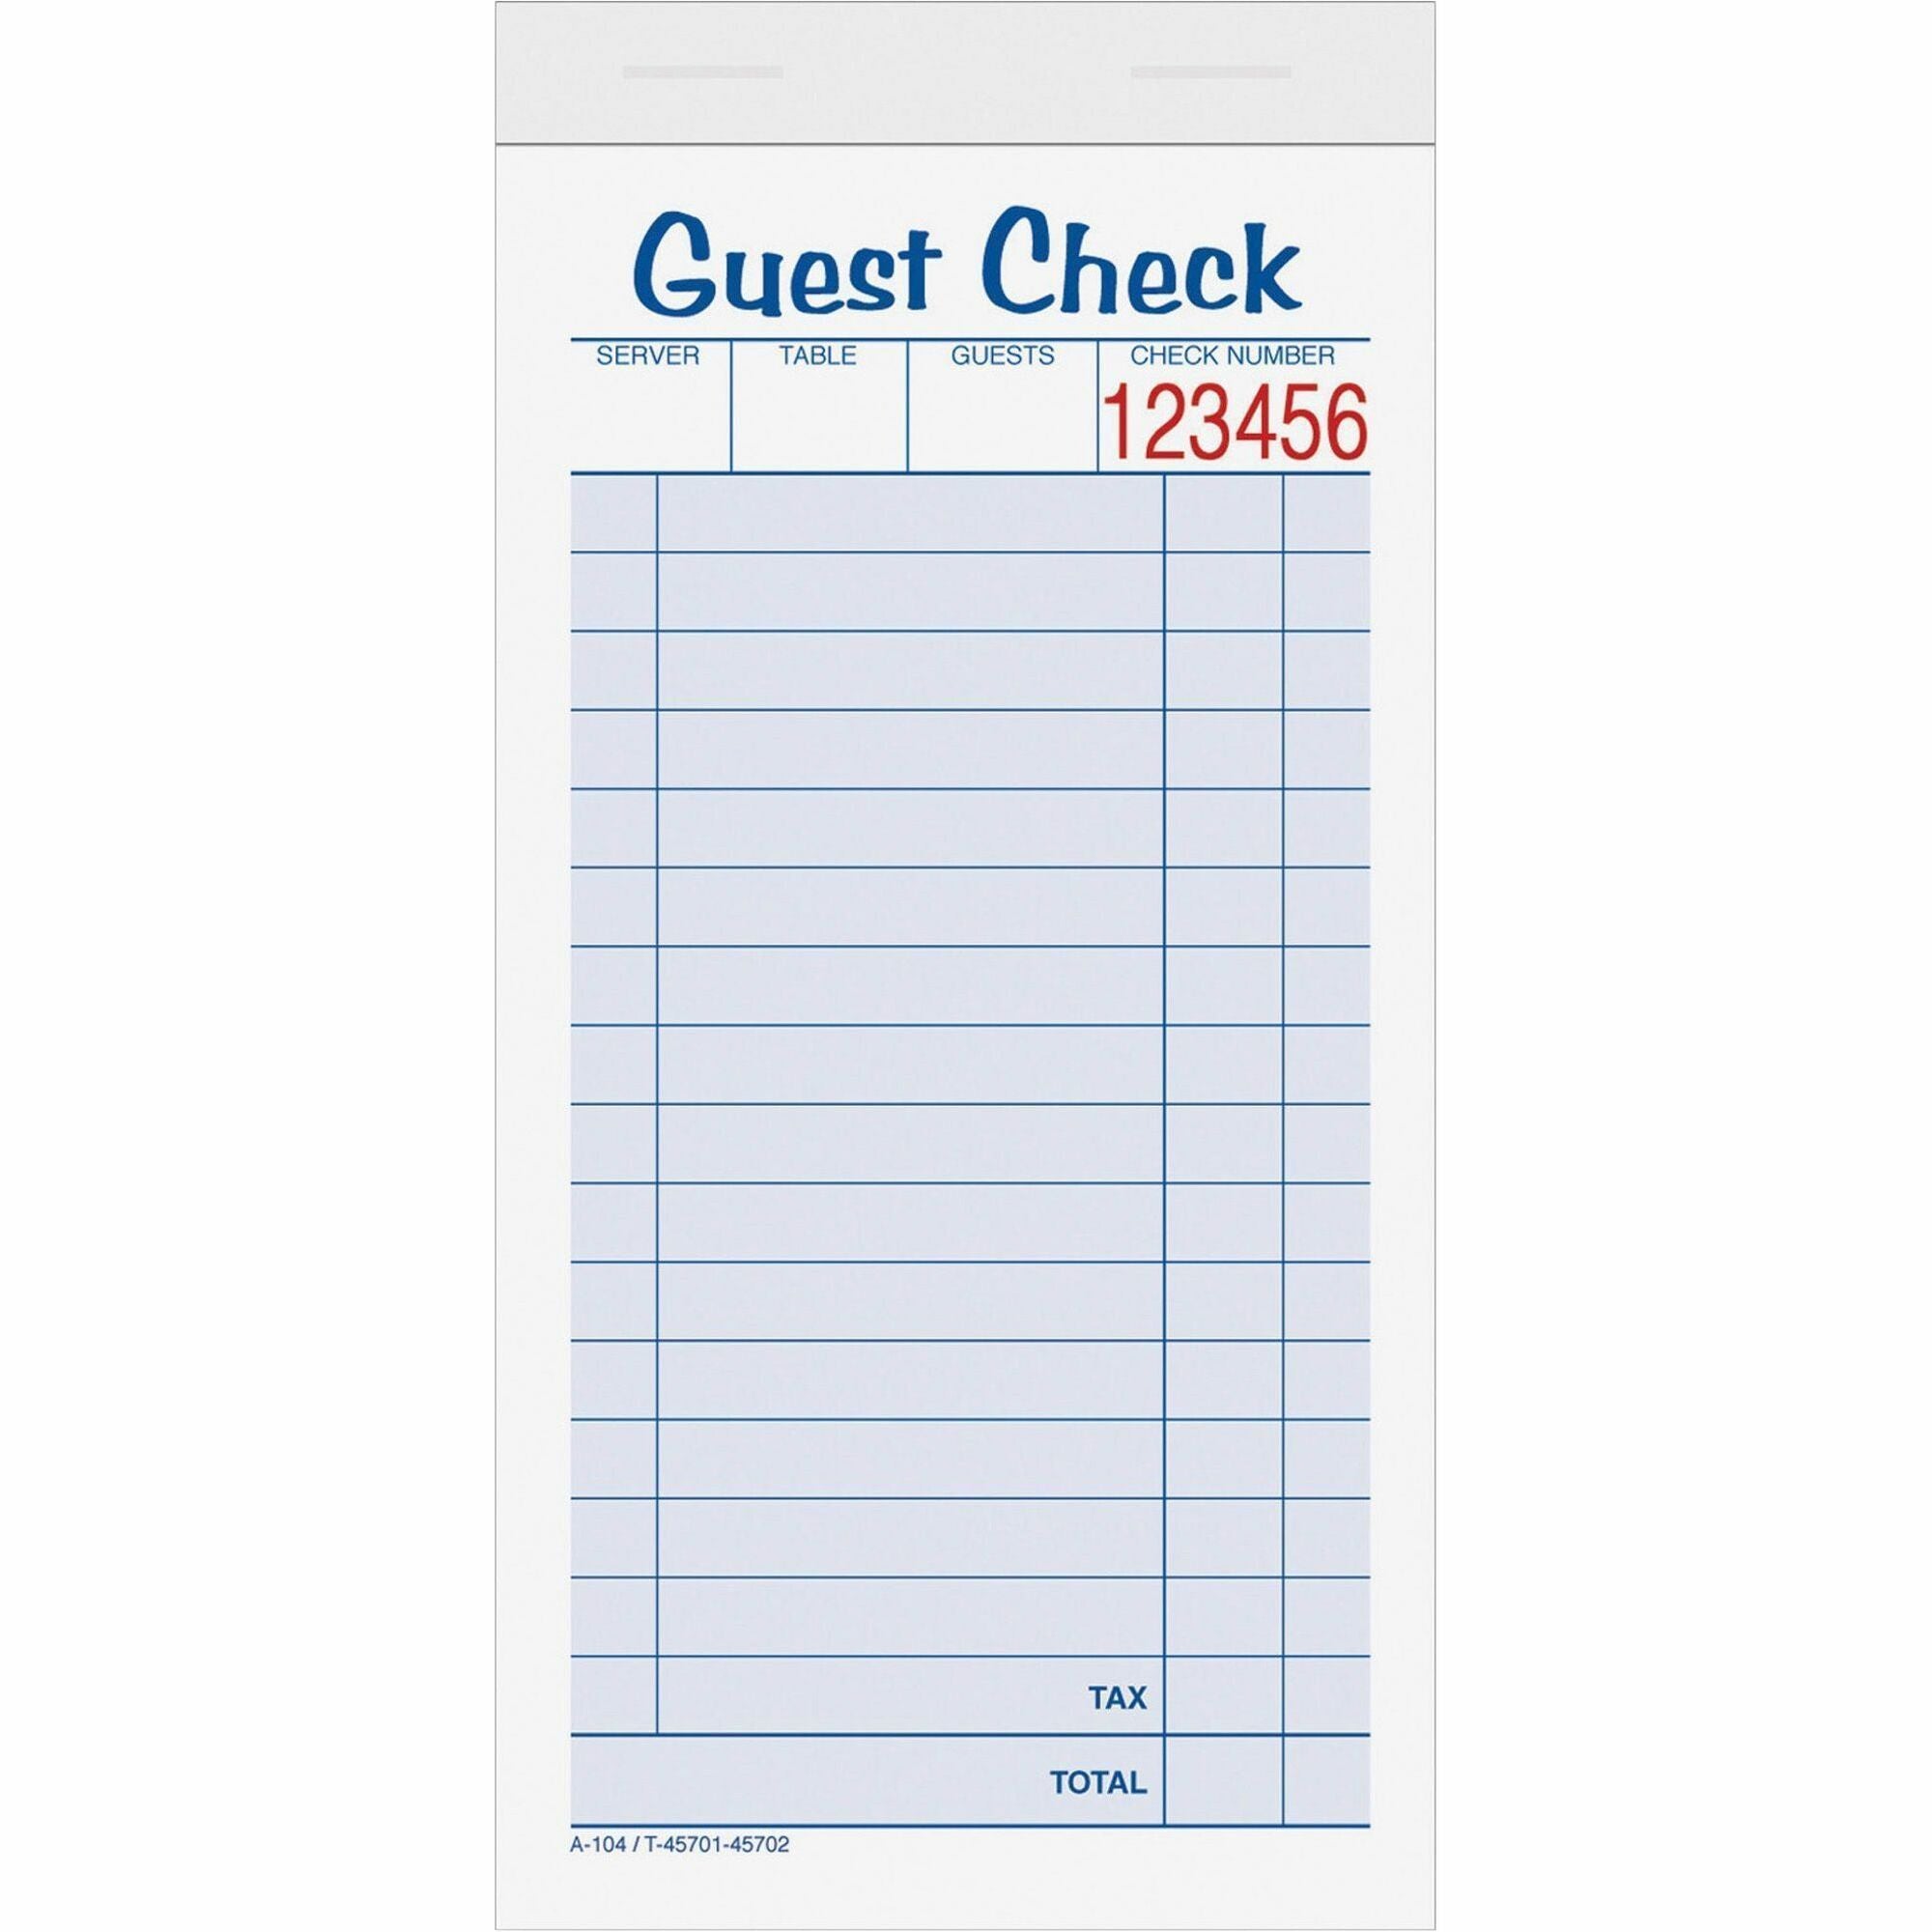 TOPS 2-part Carbonless Guest Check Books - 2 Part - 3.37" x 5.50" Sheet Size - Blue, Green, Red Print Color - 10 / Pack - 